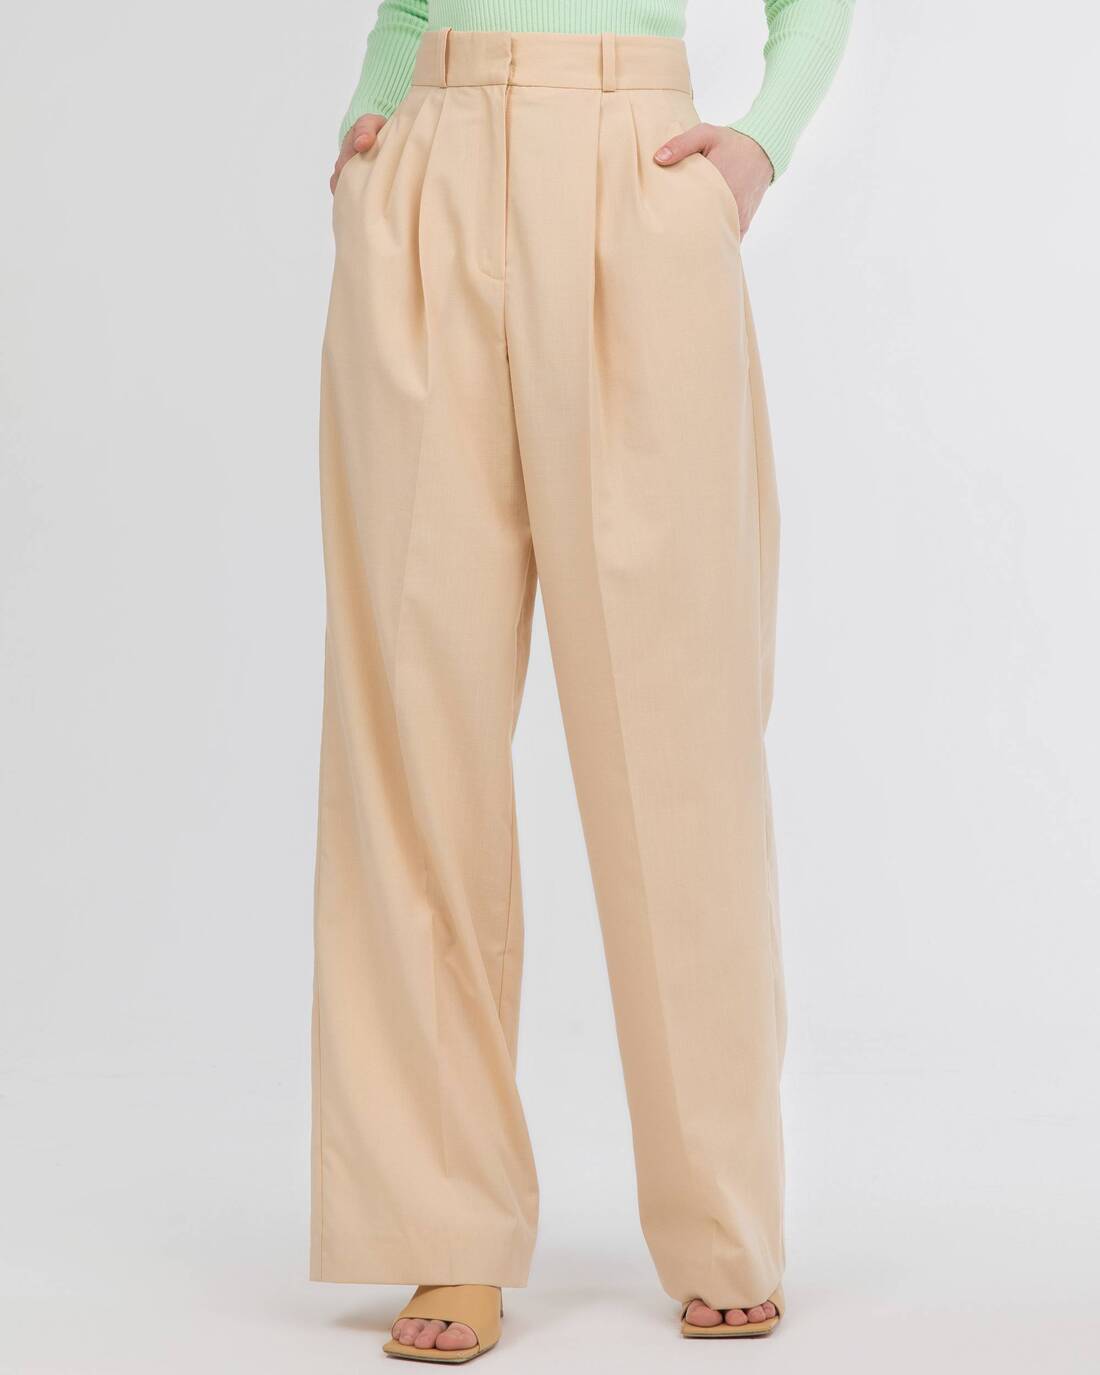 Costume pants with pleats